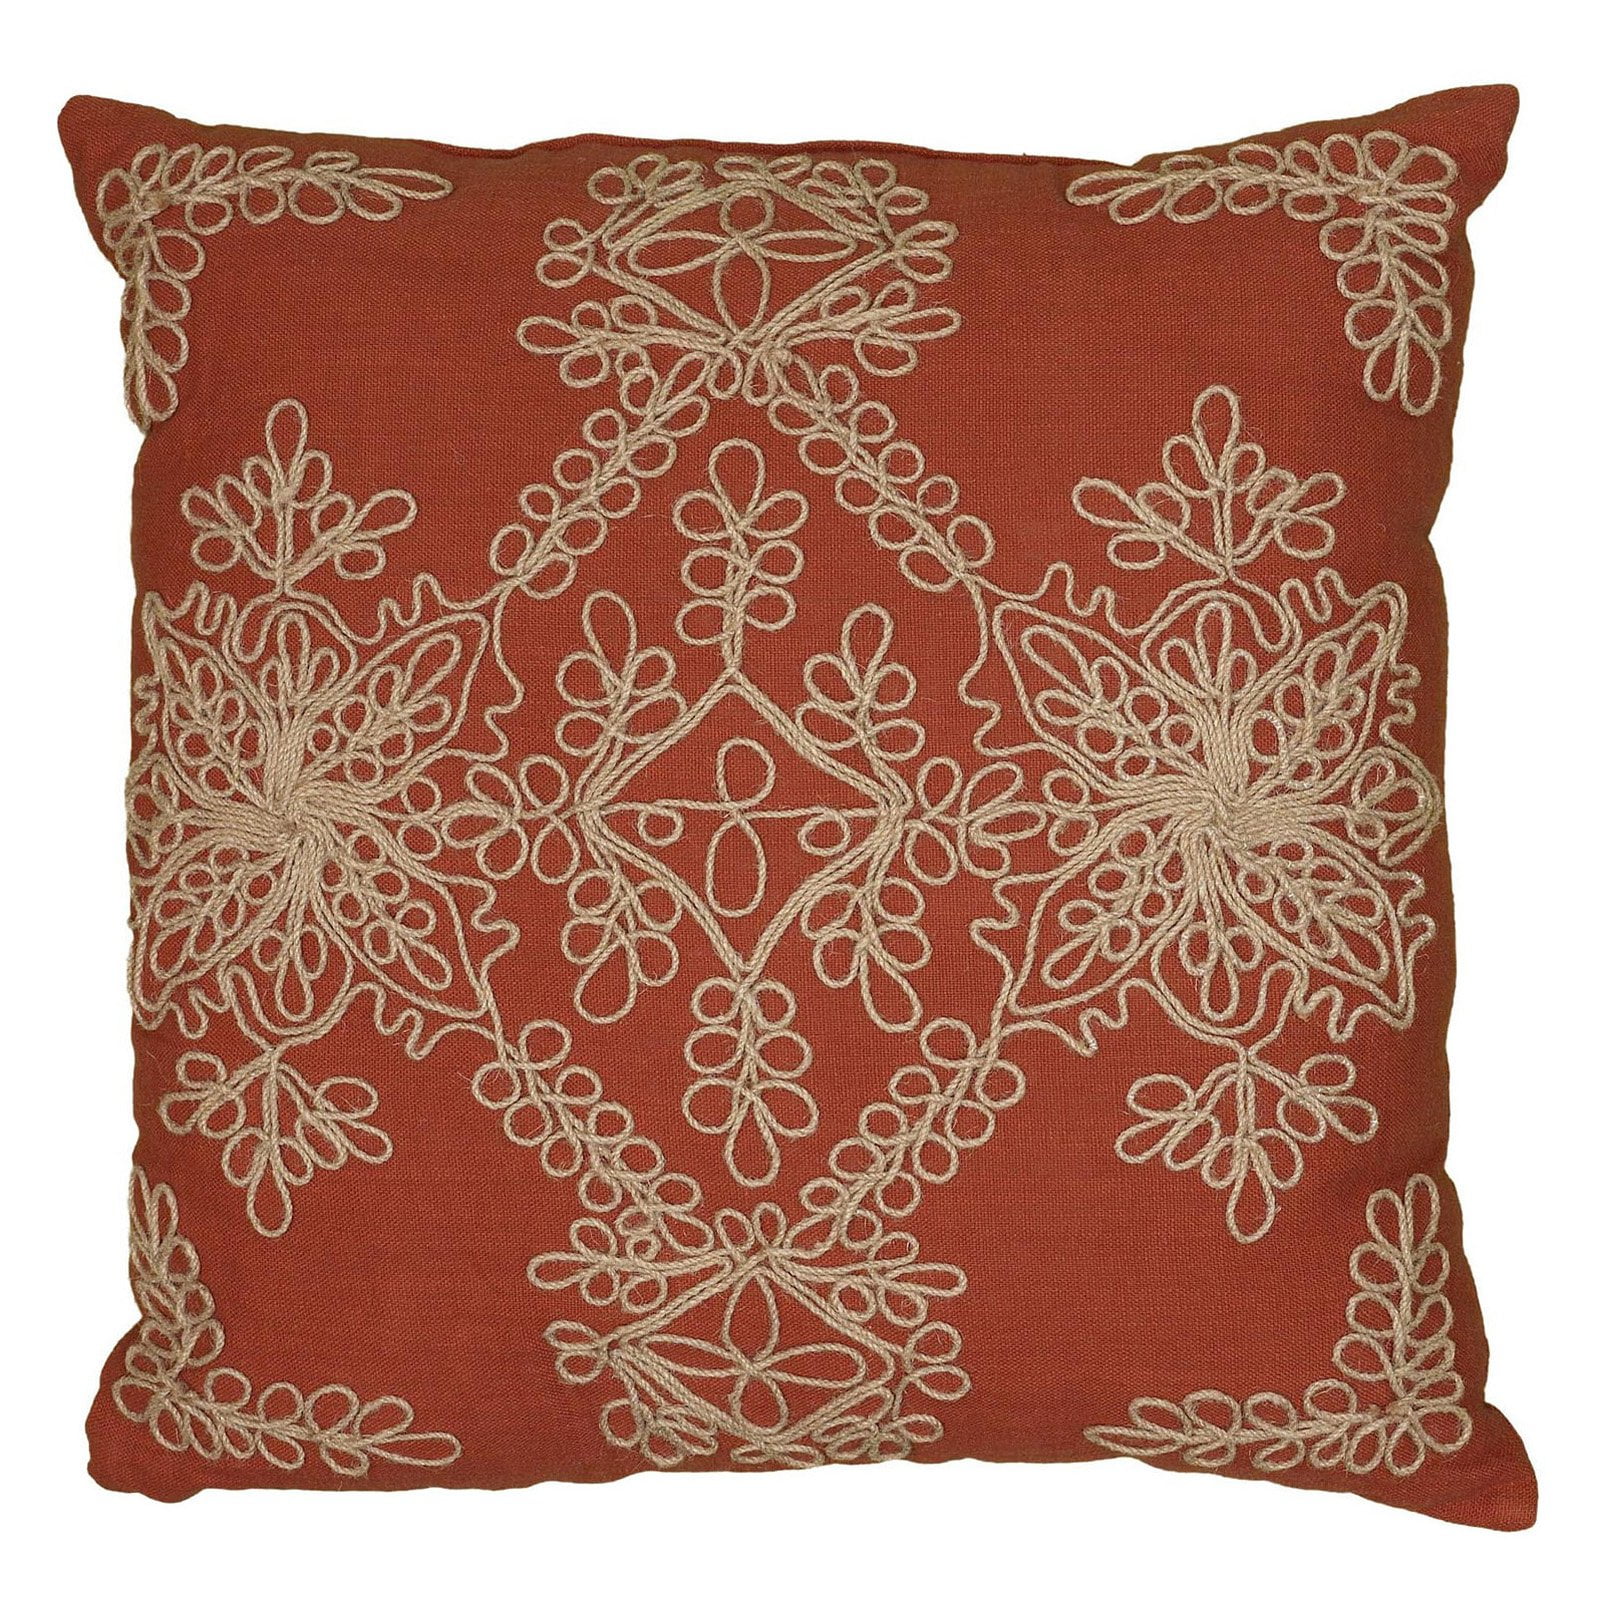 Rizzy Home Medallion Poly Filled Decorative Throw Pillow, 18